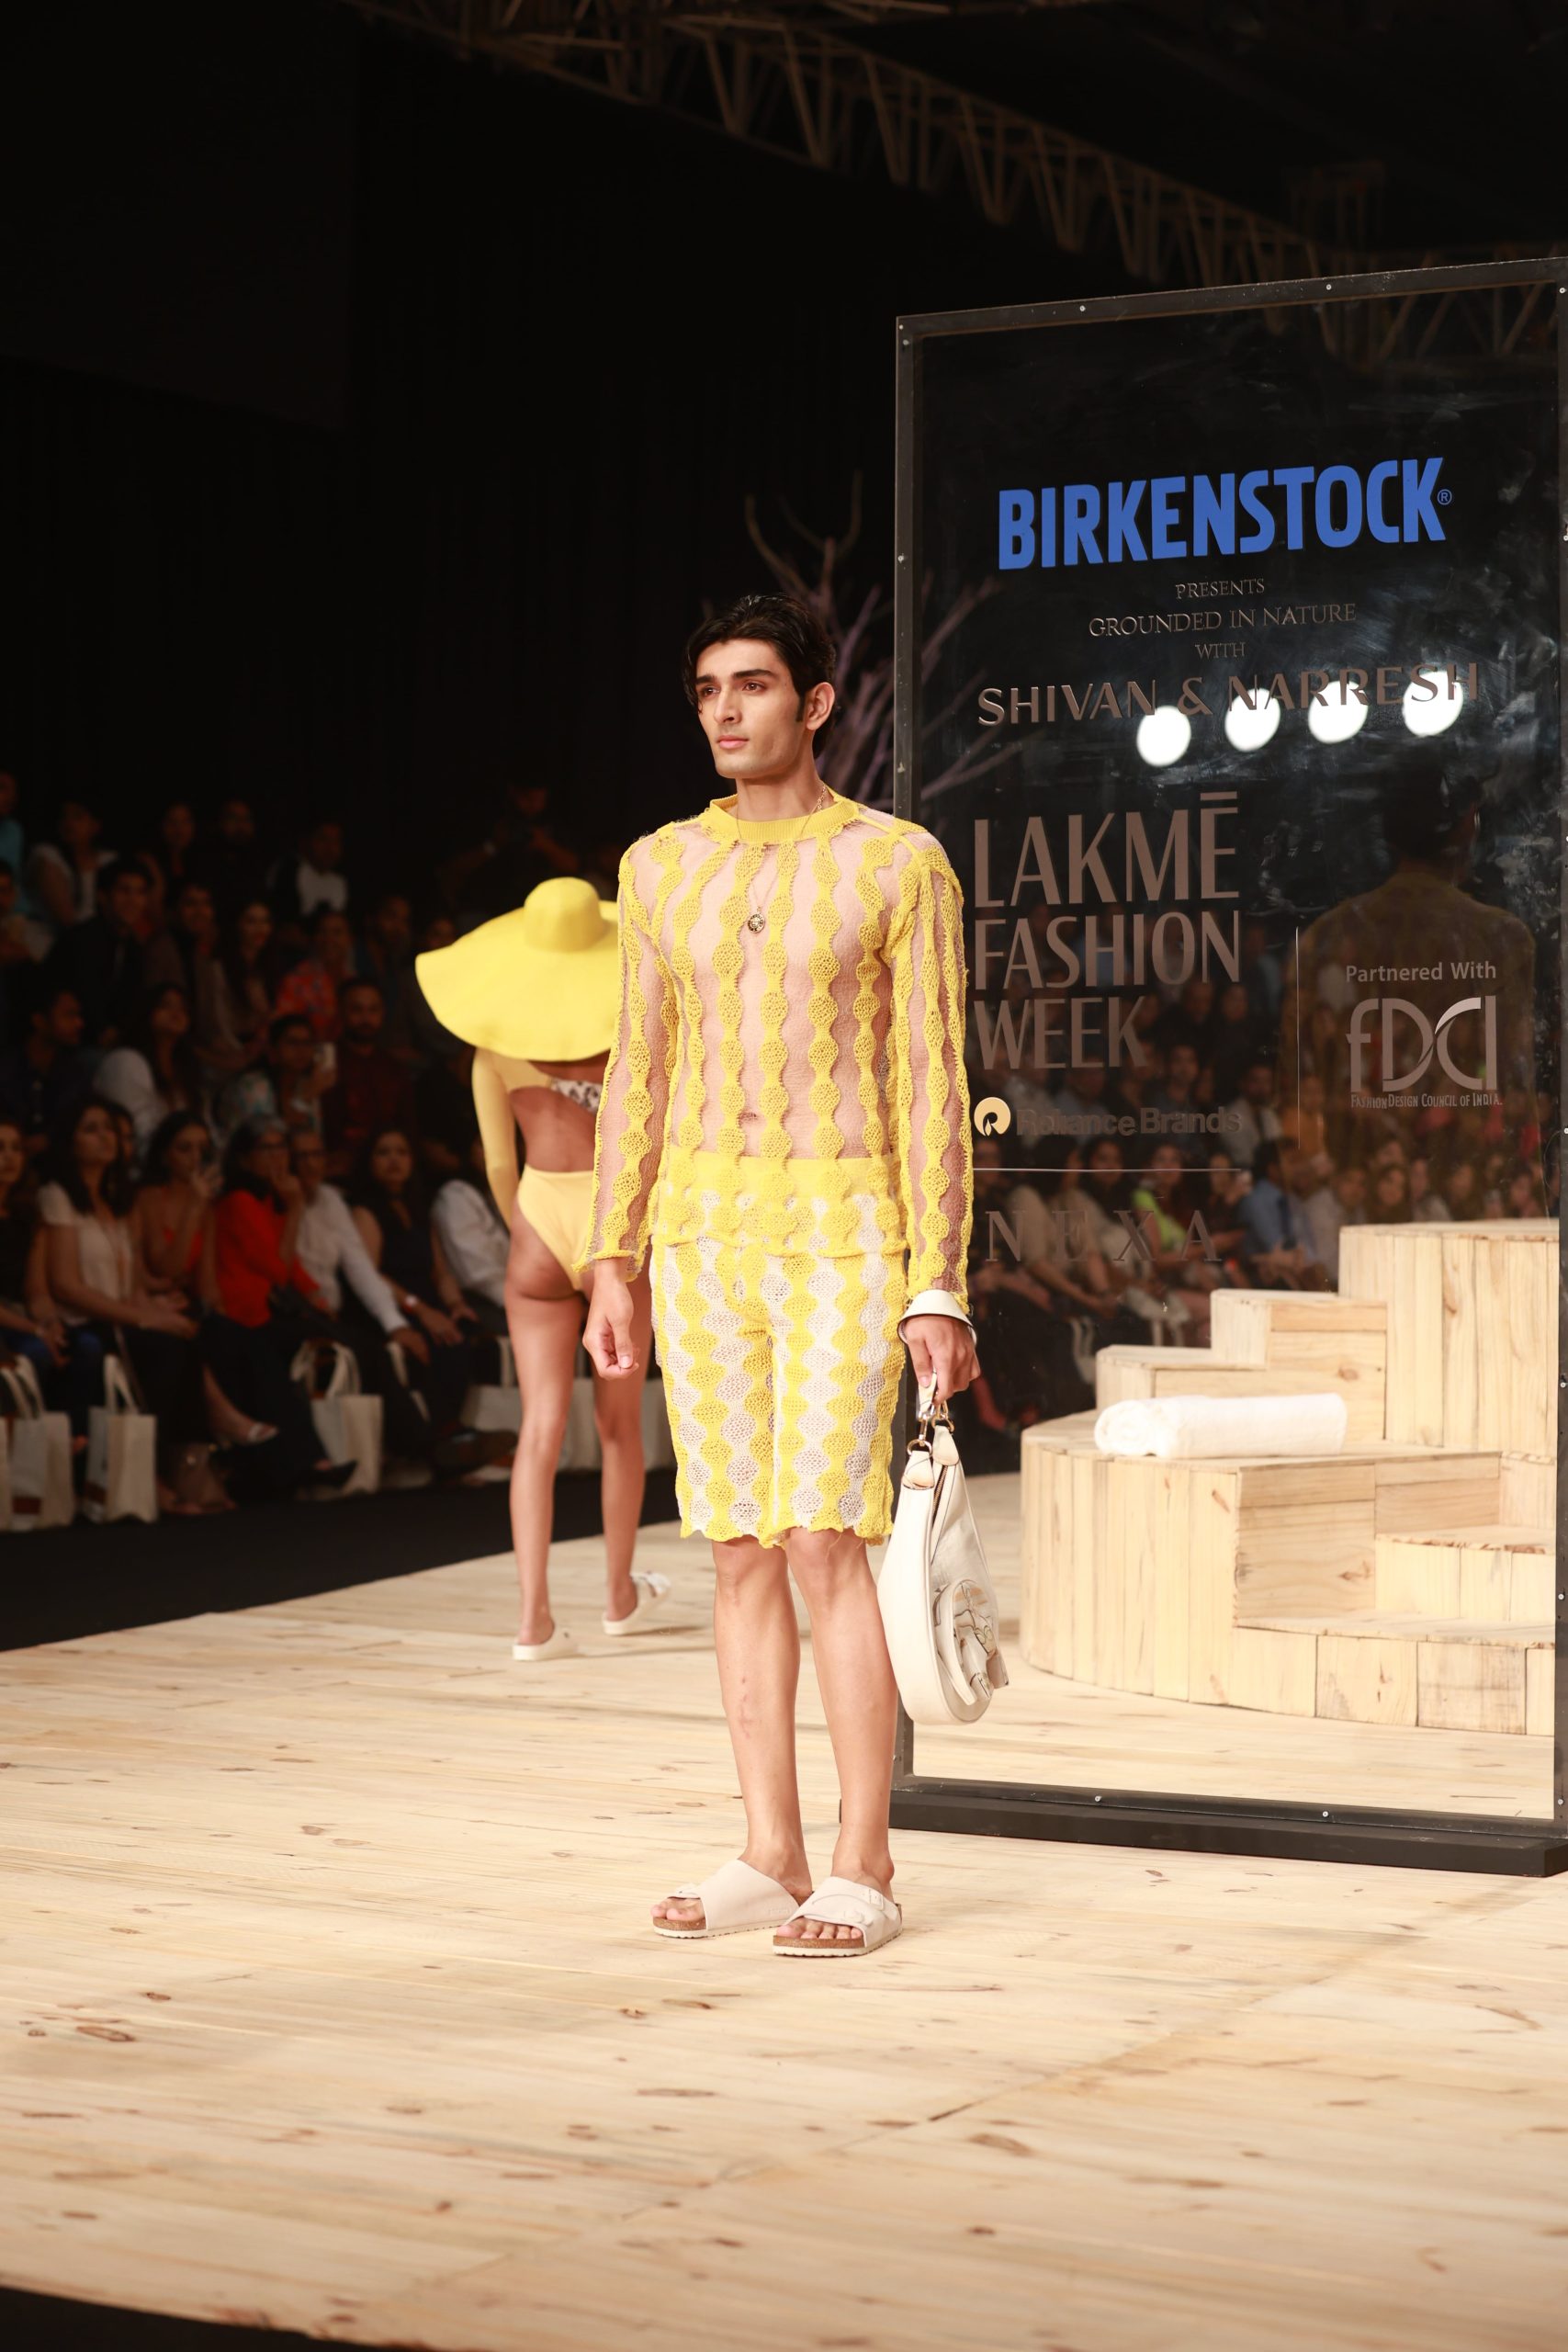 BIRKENSTOCK presents GROUNDED IN NATURE with SHIVAN NARRESH at LAKMÉ FASHION WEEK X FDCI(8) min